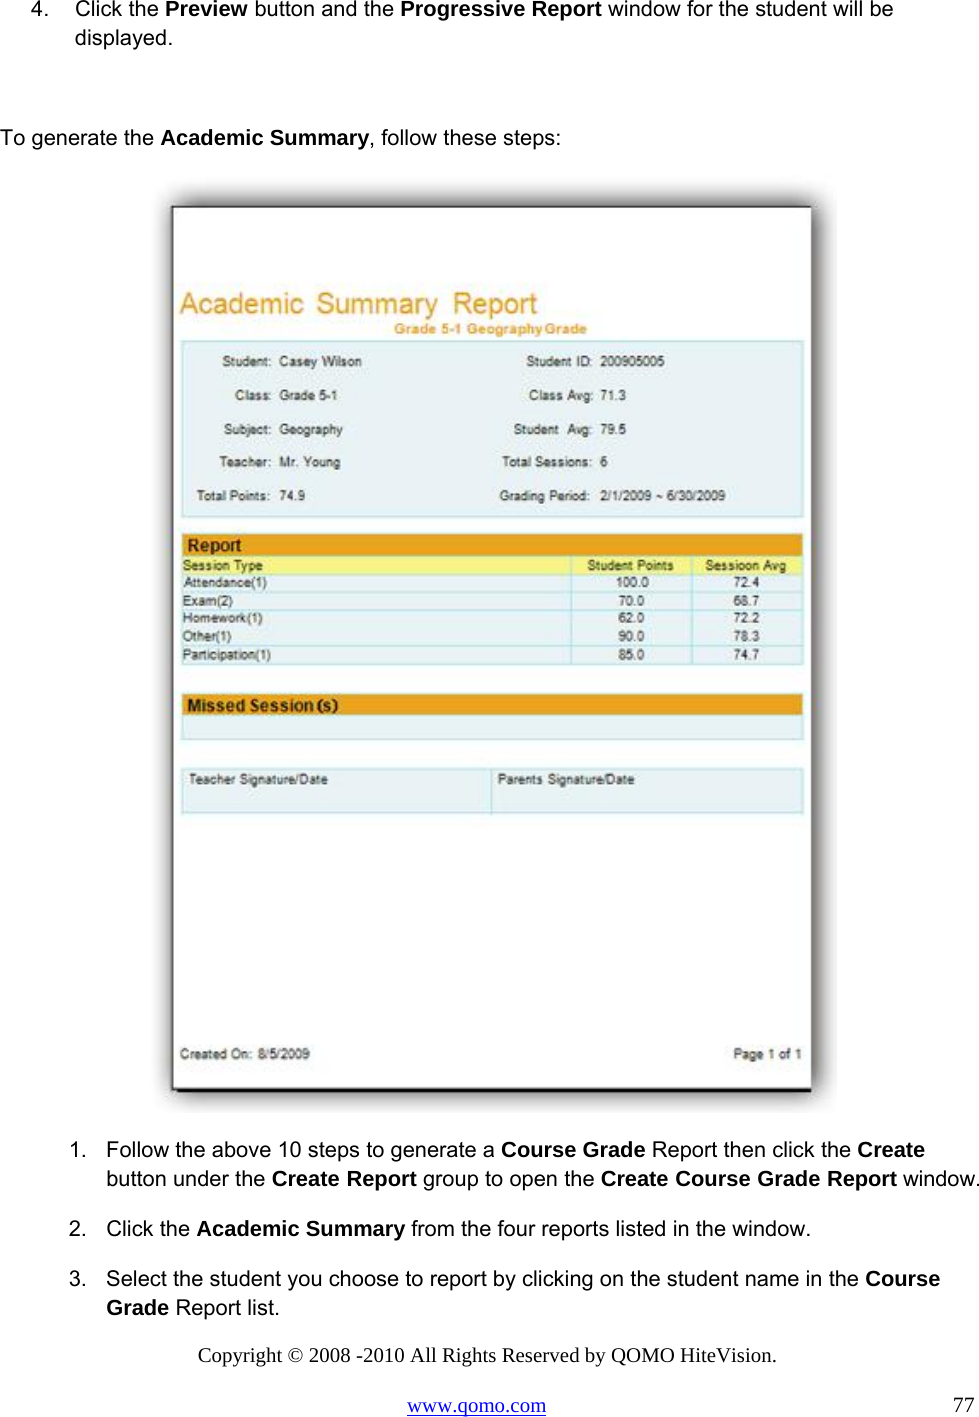 Copyright © 2008 -2010 All Rights Reserved by QOMO HiteVision. www.qomo.com                                                                          77 4. Click the Preview button and the Progressive Report window for the student will be displayed.  To generate the Academic Summary, follow these steps:  1.  Follow the above 10 steps to generate a Course Grade Report then click the Create button under the Create Report group to open the Create Course Grade Report window. 2. Click the Academic Summary from the four reports listed in the window. 3.  Select the student you choose to report by clicking on the student name in the Course Grade Report list. 